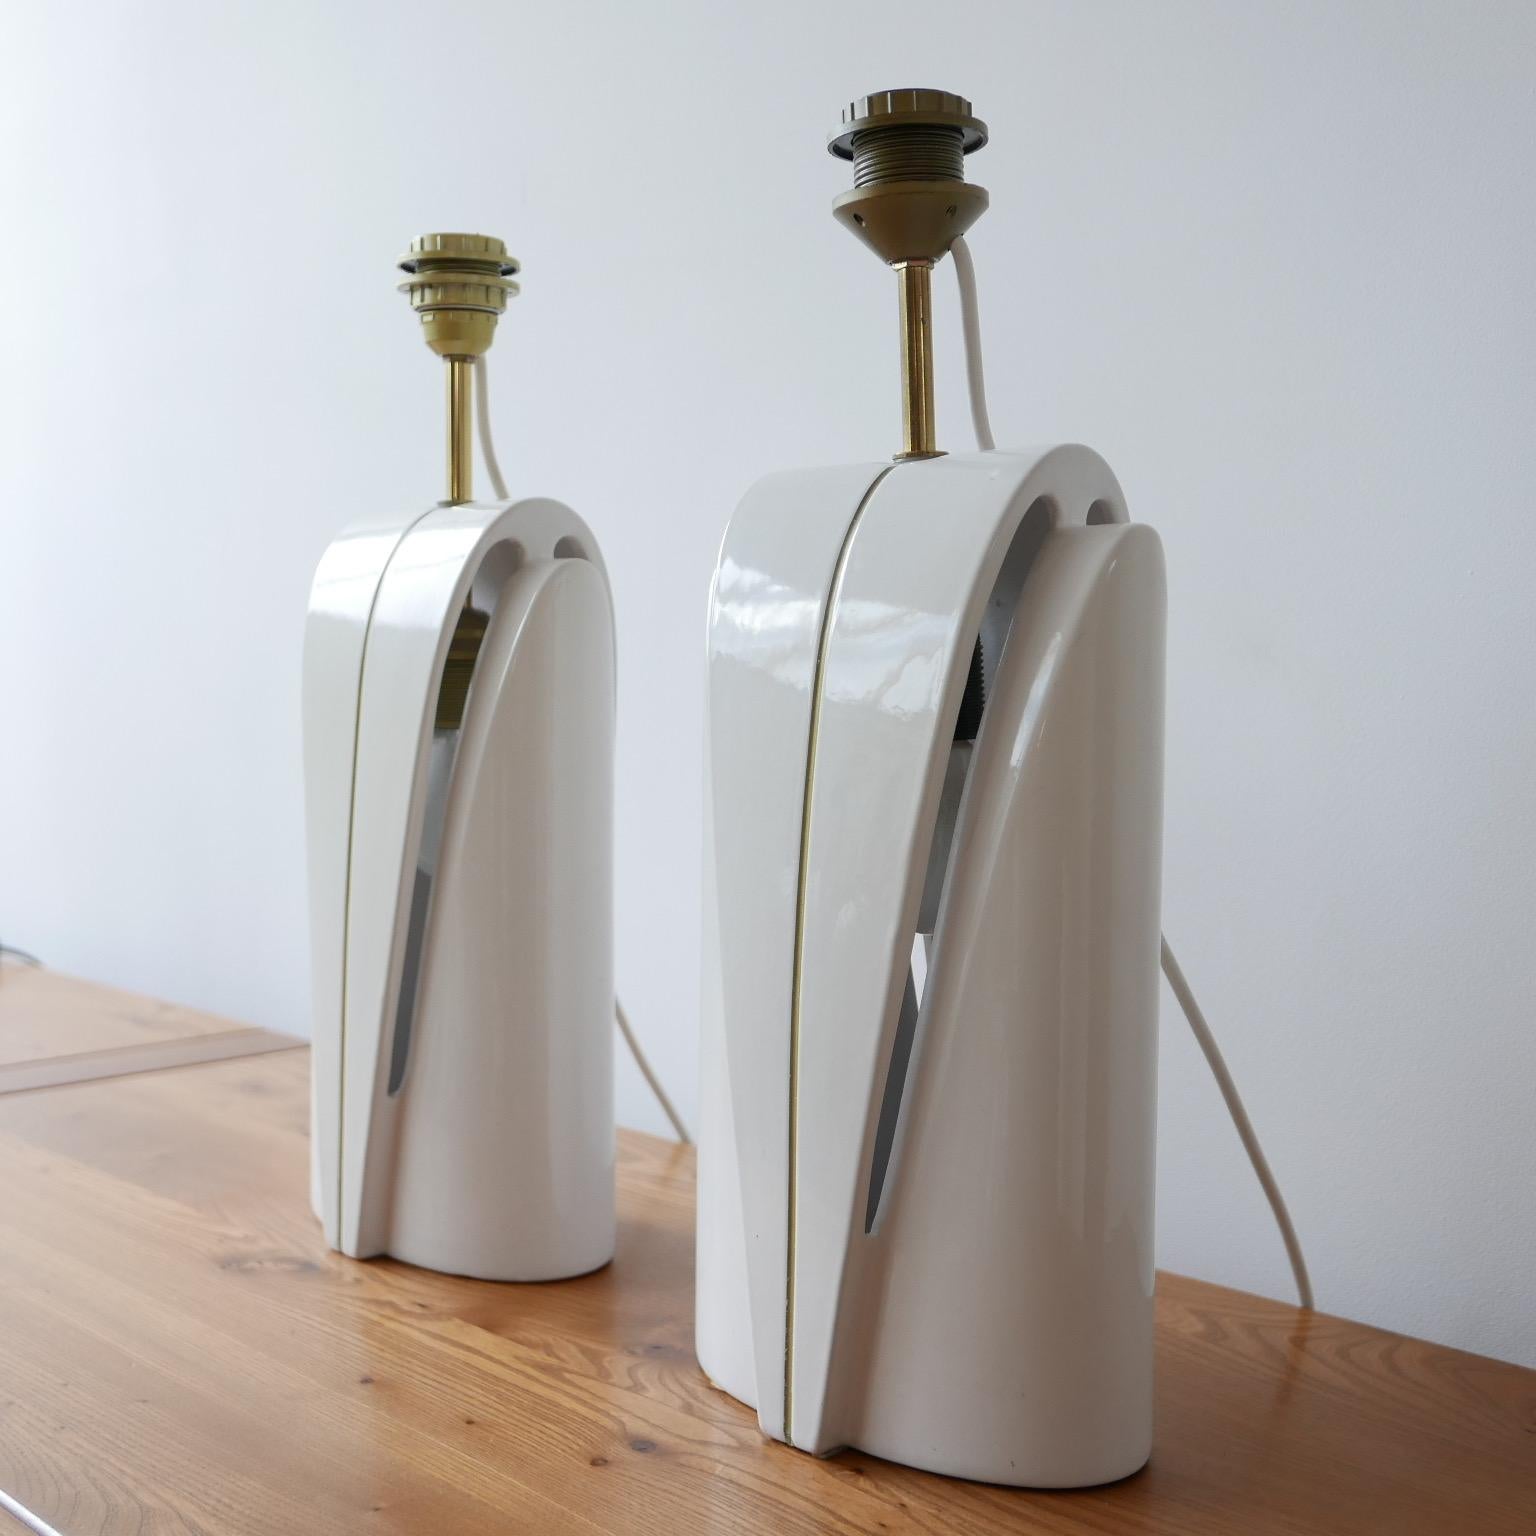 A smart pair of ceramic lamps. 

Late 20th century, circa 1980s, Belgium. 

A clever design has an integrated internal bulb in the lamps body which diffuses light as well as the normal bulb holder. 

Very good condition, since re-wired and PAT